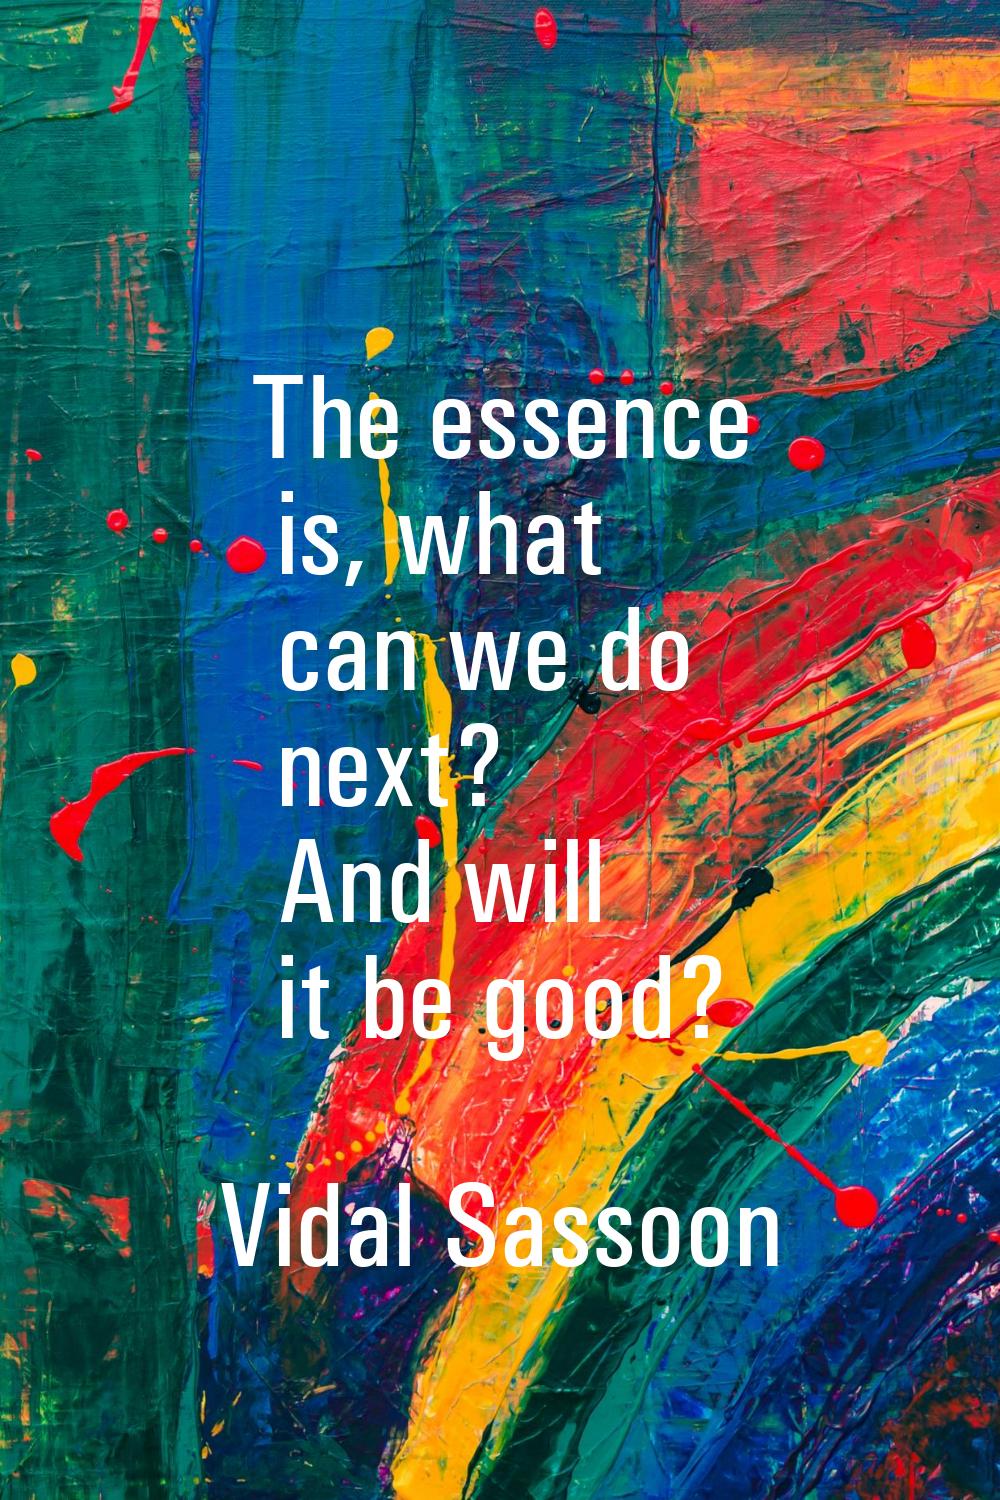 The essence is, what can we do next? And will it be good?